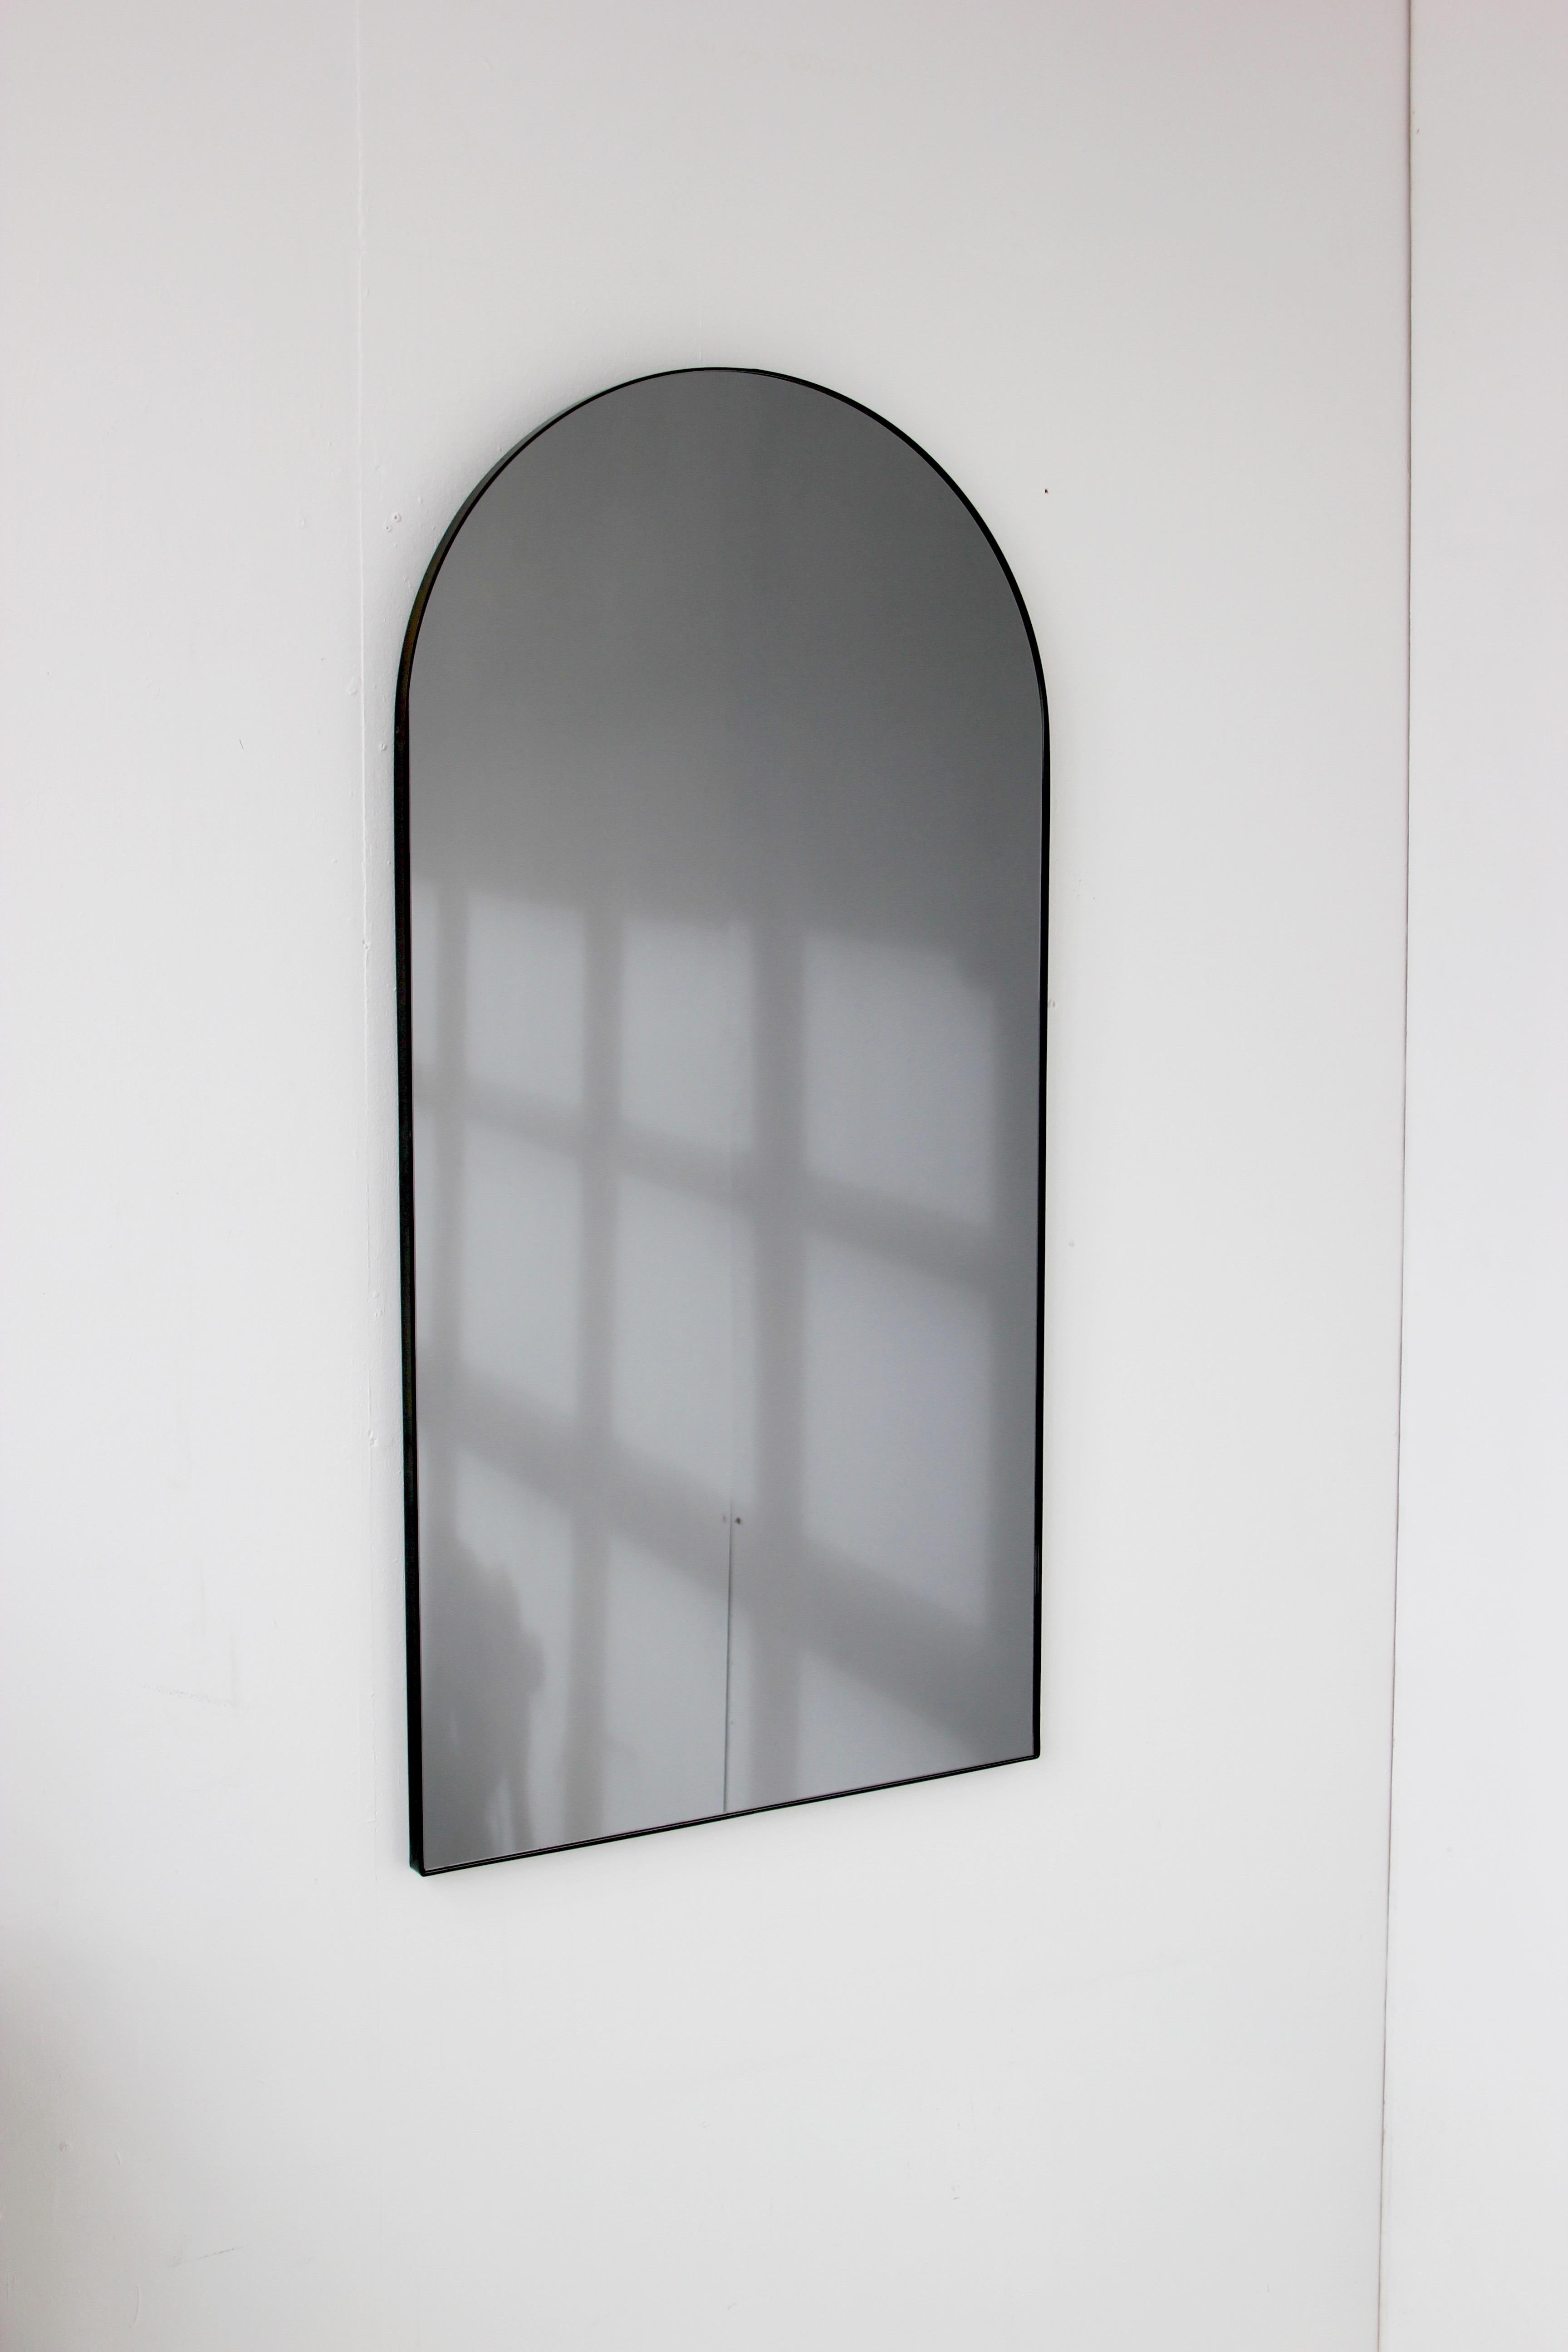 Delightful handcrafted silver long arched mirror with a bronze patinated frame. Also available with a brass frame

Ideal above a console table in the hallway, above a beautiful fireplace, in the bedroom or in the bathroom.

Available with a